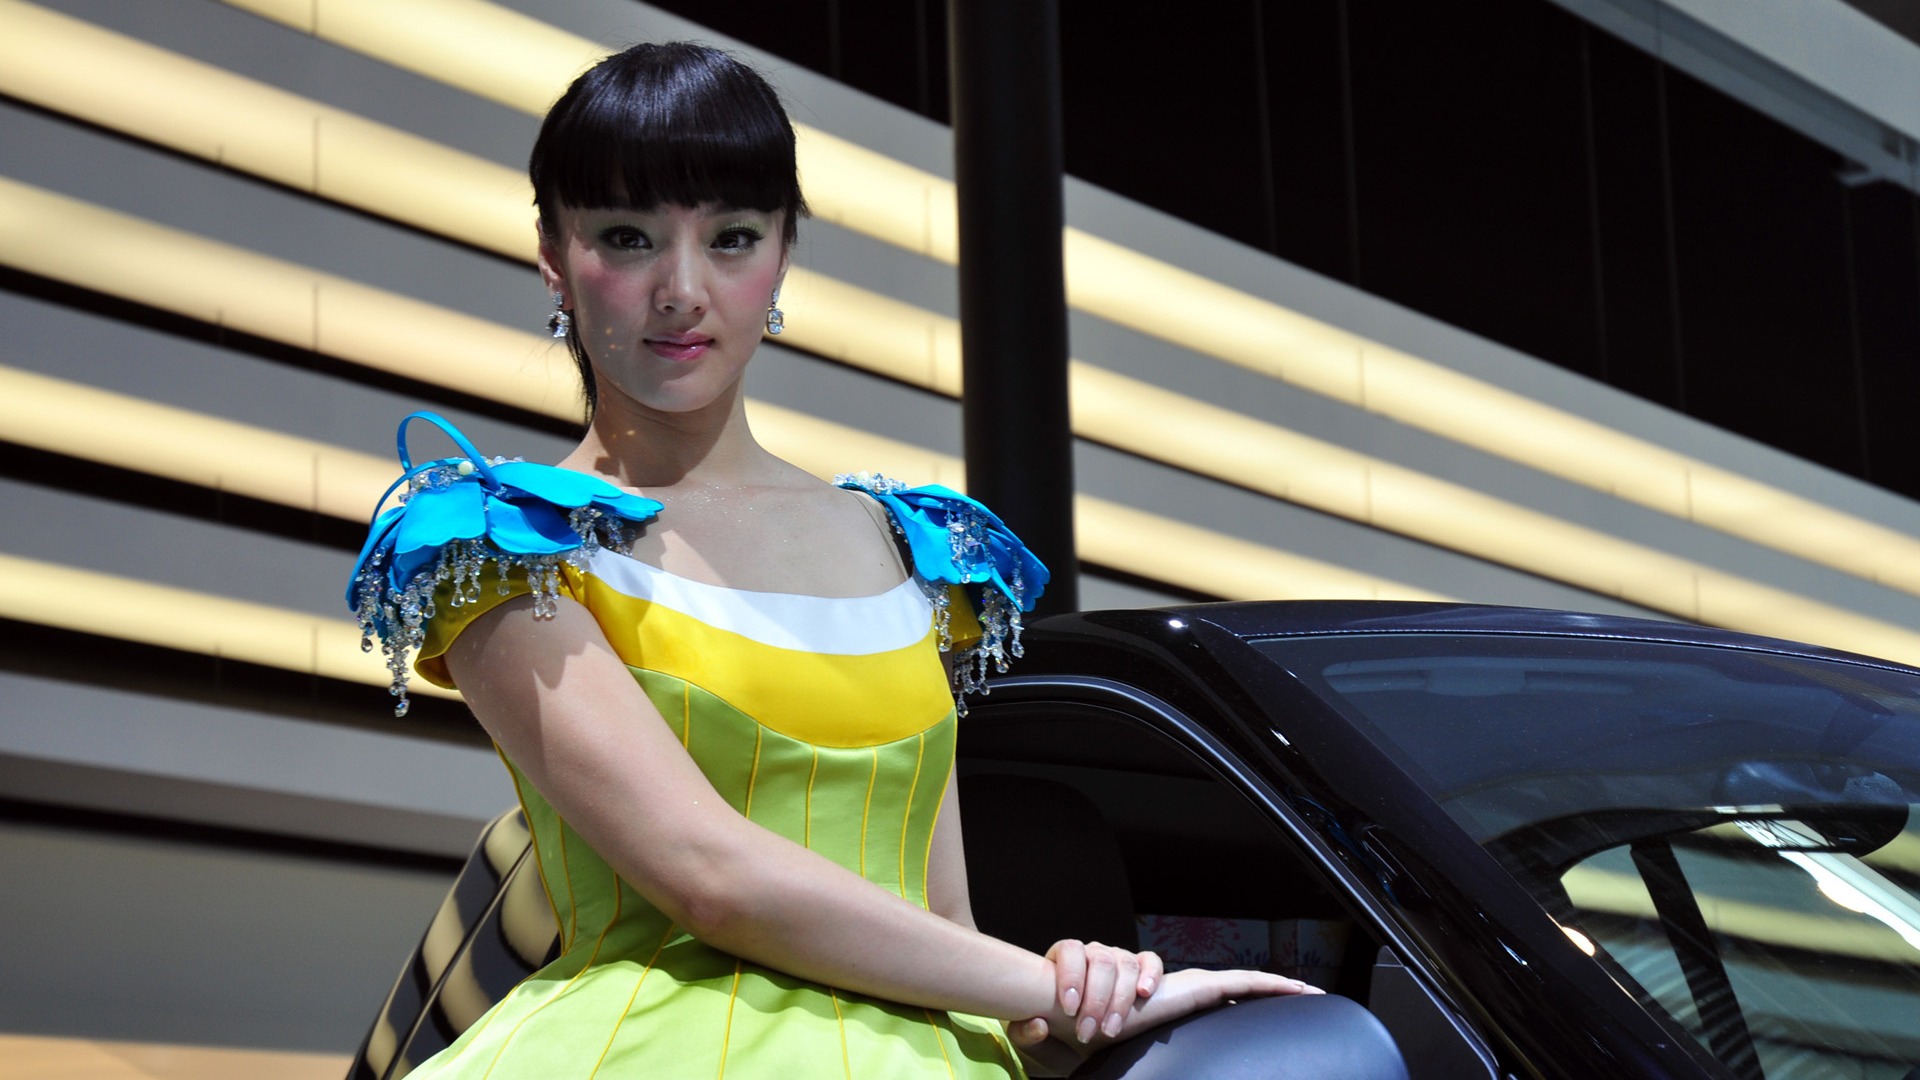 2010 Beijing Auto Show car models Collection (2) #1 - 1920x1080